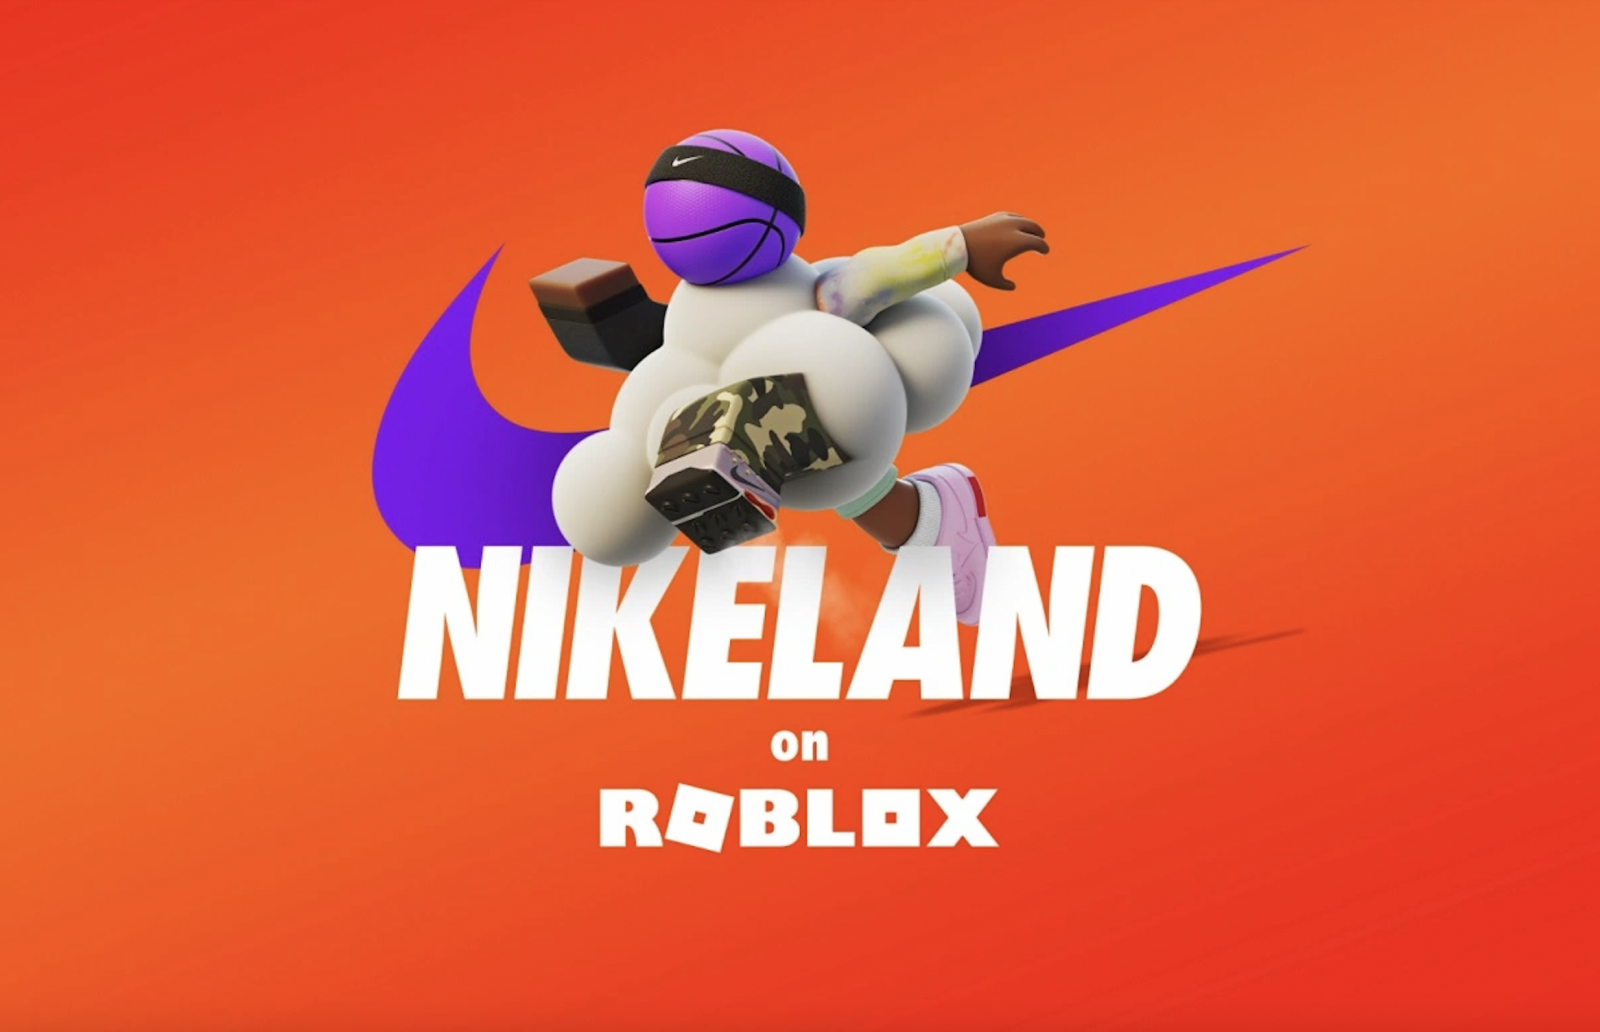 A Nikeland on Roblox ad campaign